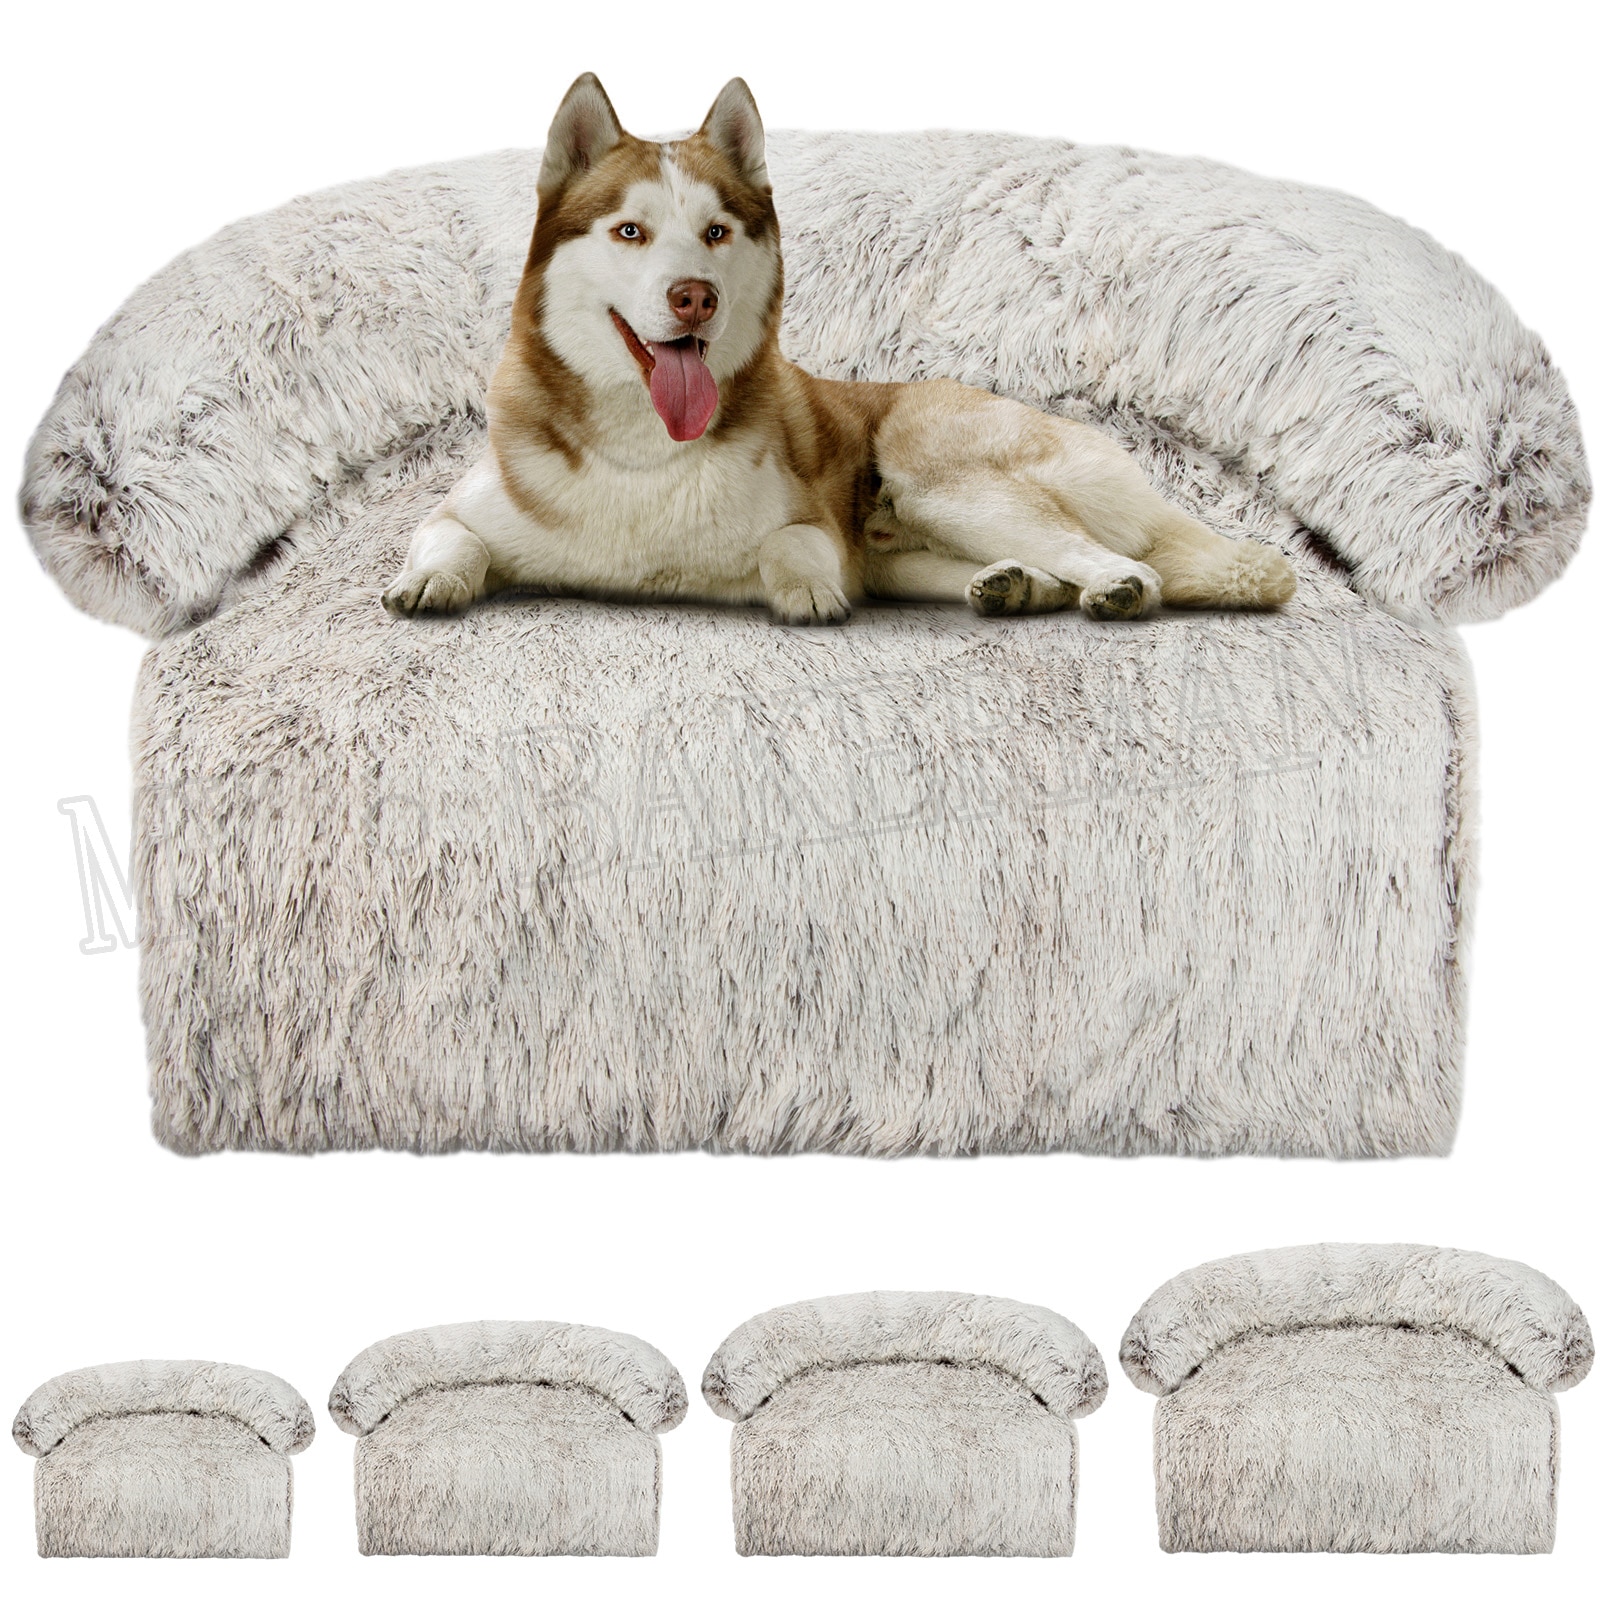 973900931 1 - Large Plush Dog Sofa Bed Couch Protector - thepamperedpooch-co, pet-beds, dog-beds